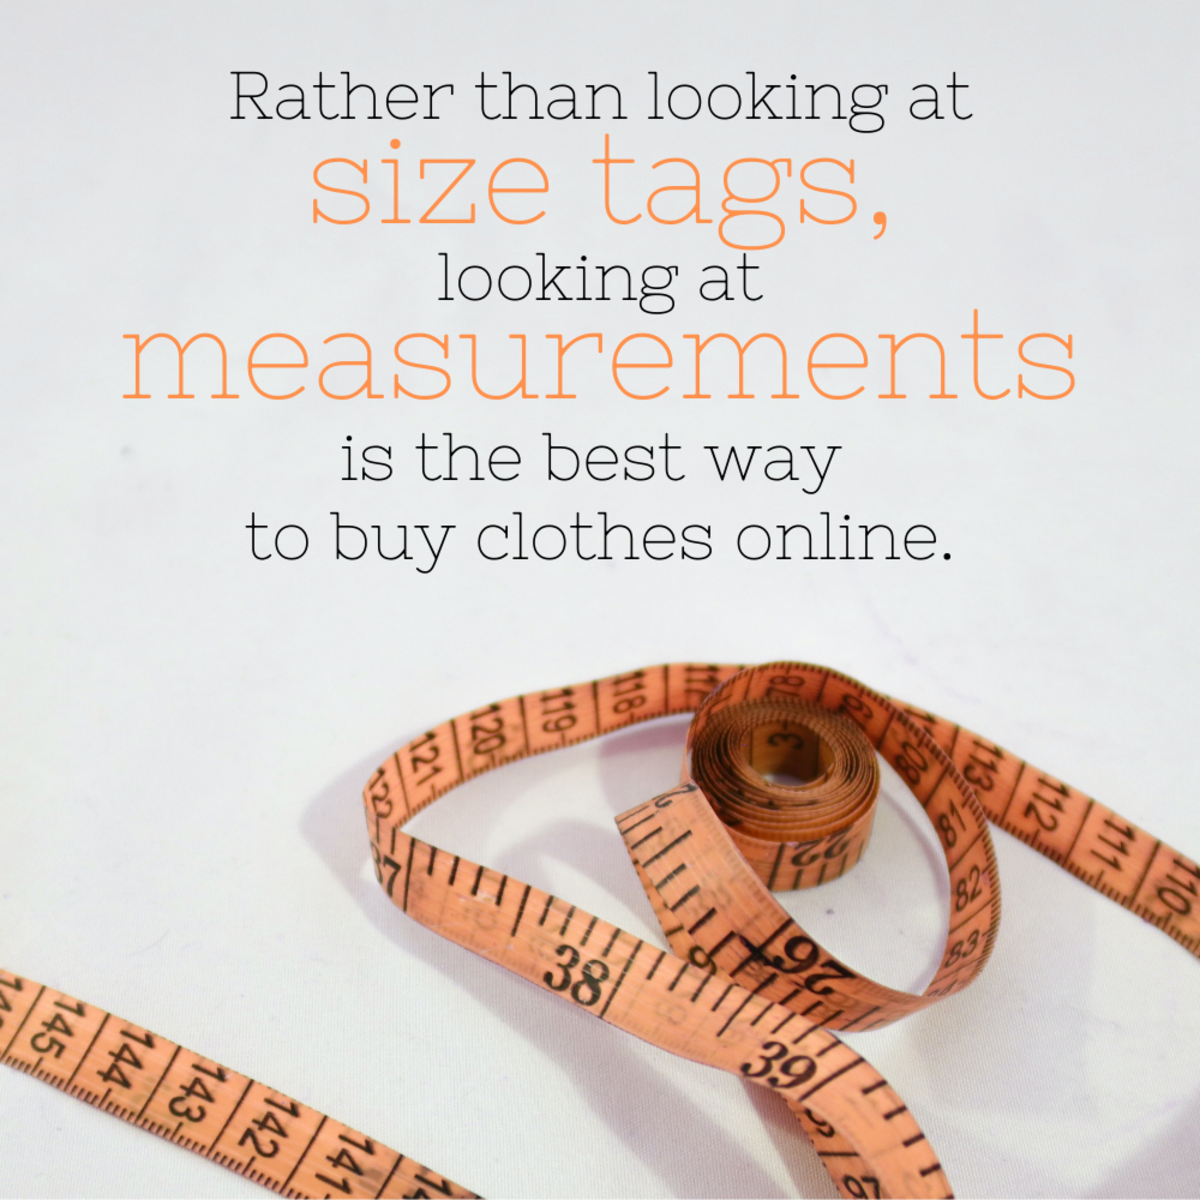 How to find clothes that fit online: Use a measuring tape - Reviewed